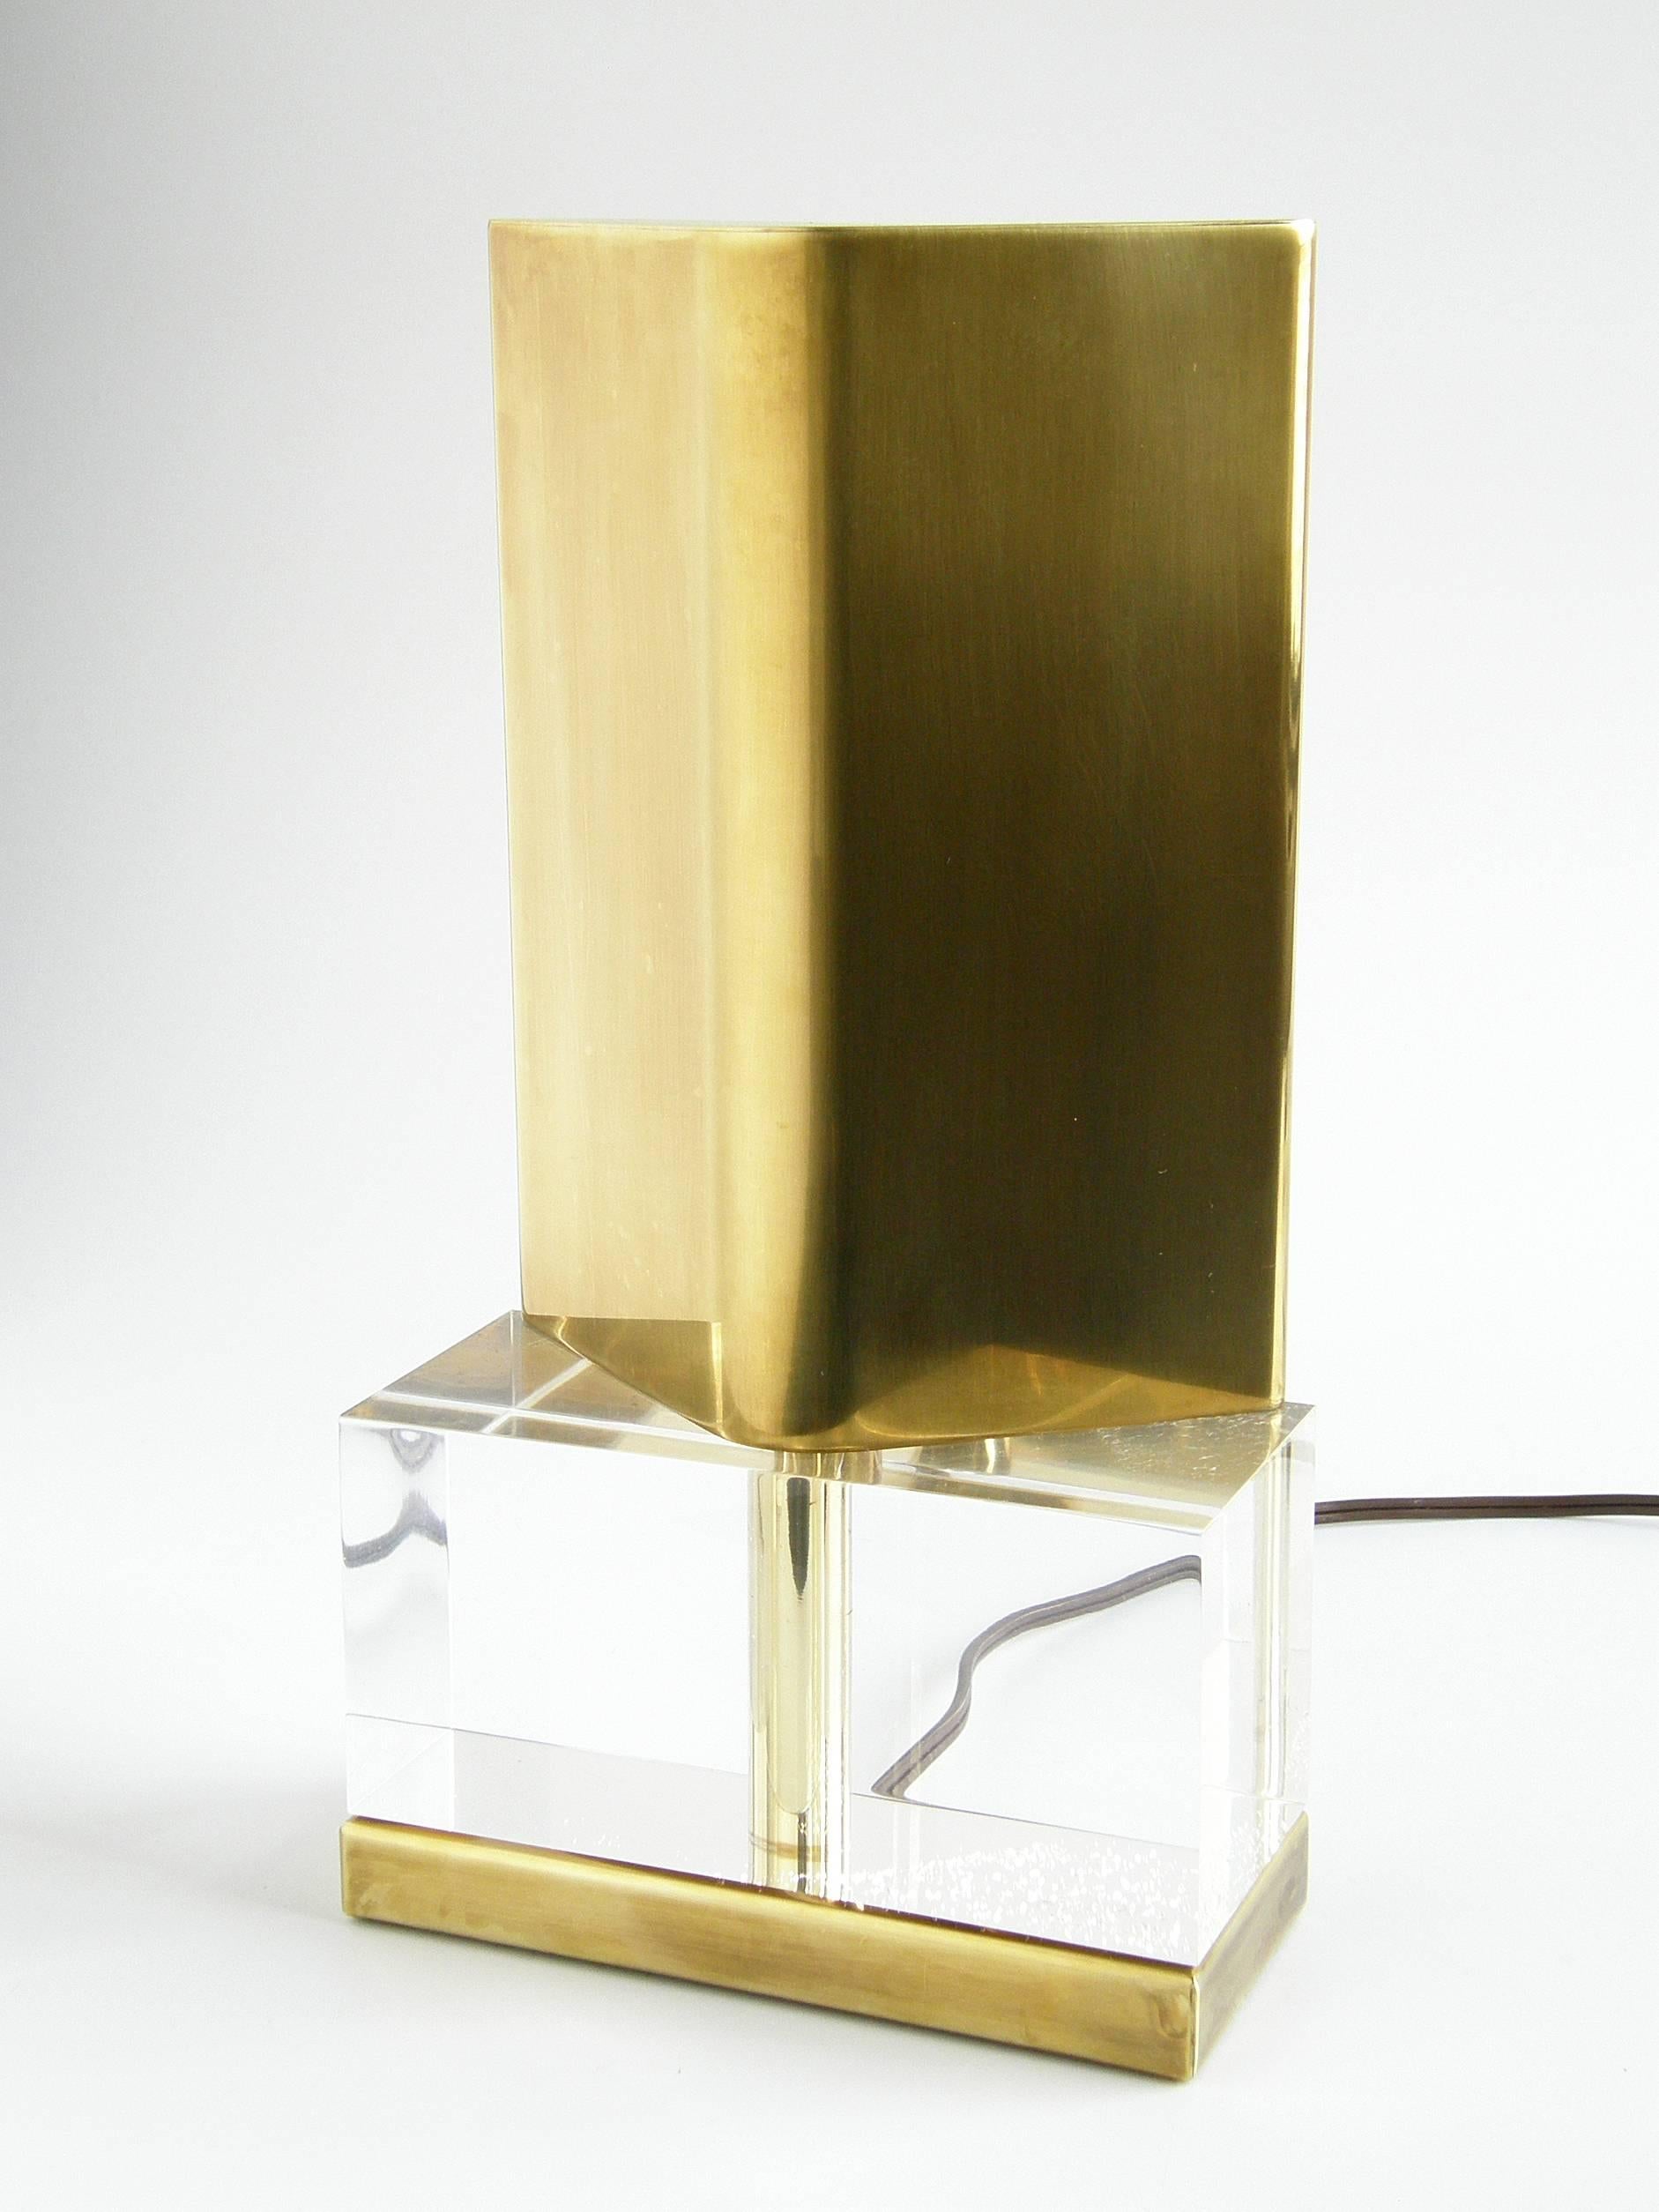 This simple reflector lamp has a rectangular Lucite cube base with a brass foot and a tent-shaped brass shade. It gives a subtle, indirect light and would make an excellent accent lamp within a shelf unit or on a table or cabinet top. It could also